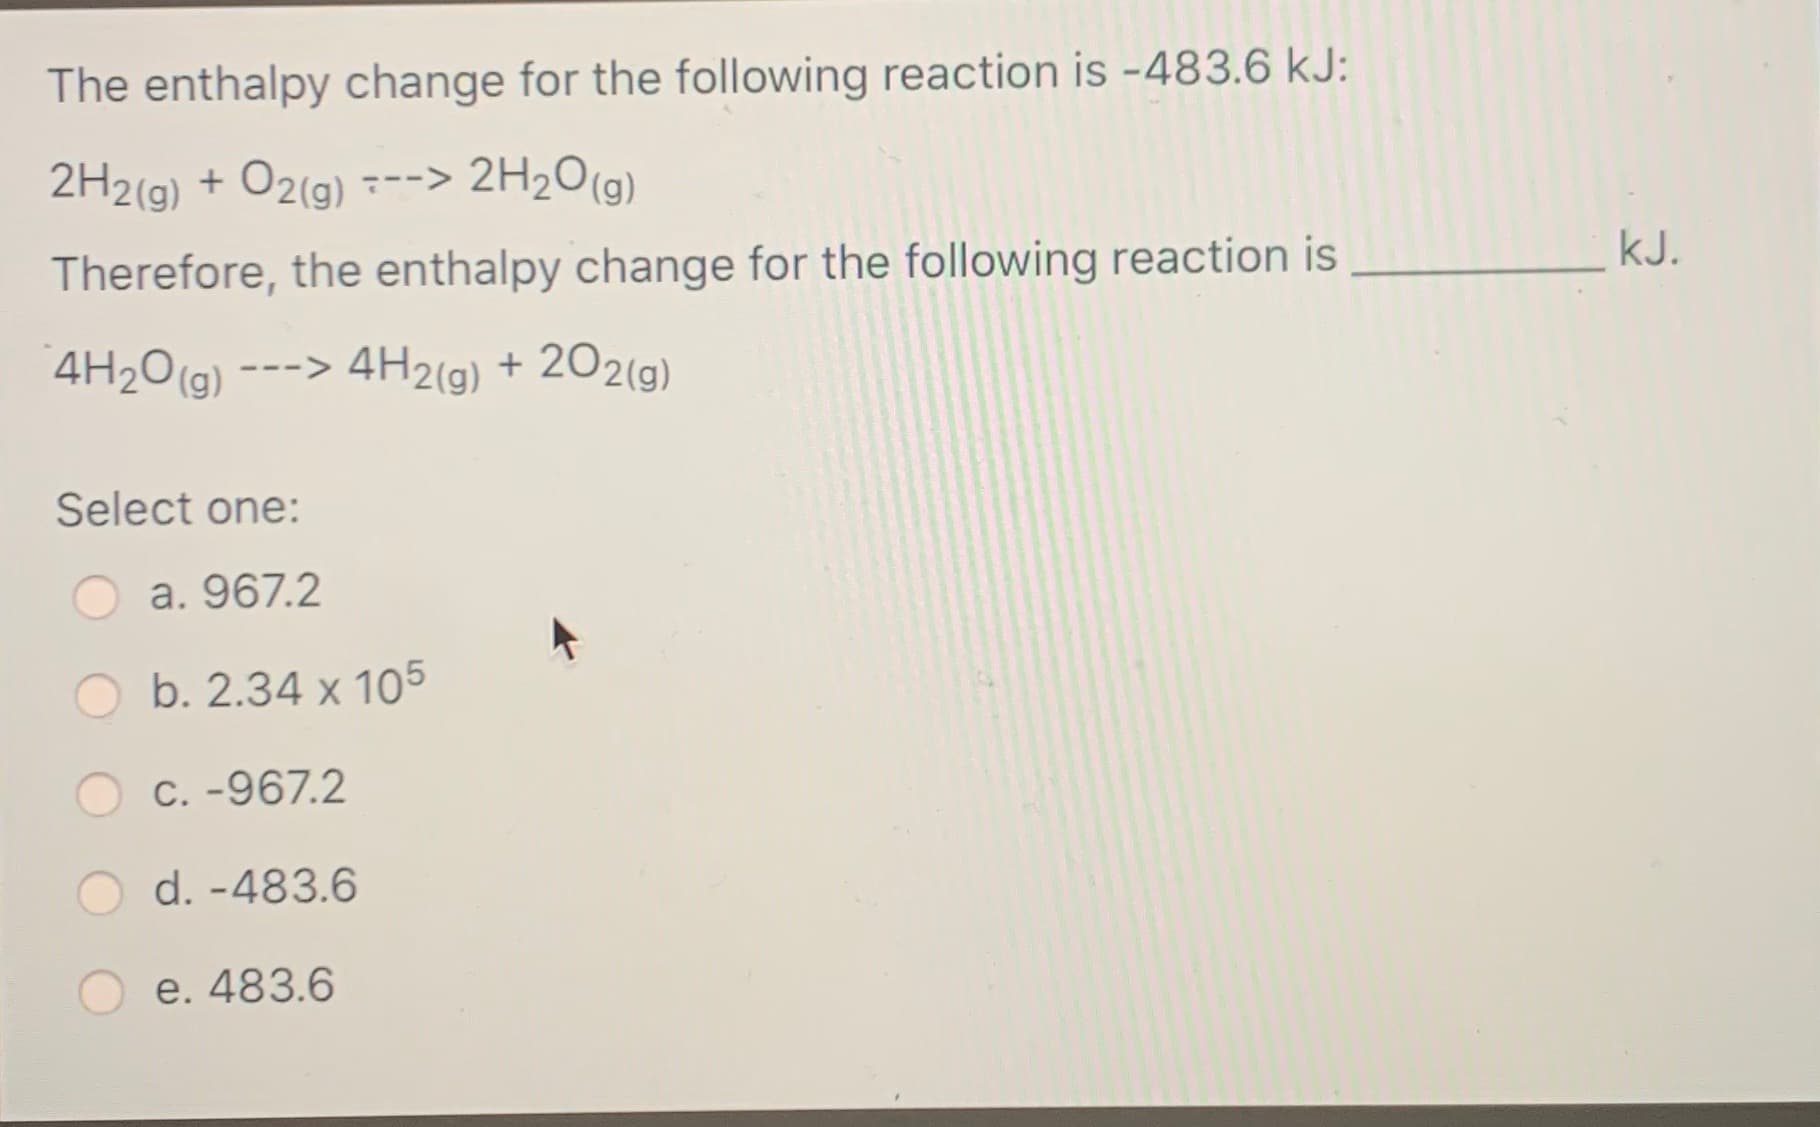 The enthalpy change for the following reaction is -483.6 kJ:
2H2(g) + O2(g) ---> 2H2O(g)
kJ.
Therefore, the enthalpy change for the following reaction is
4H2O(g)
---> 4H2(g) + 202(g)
Select one:
a. 967.2
b. 2.34 x 105
C. -967.2
d. -483.6
e. 483.6
